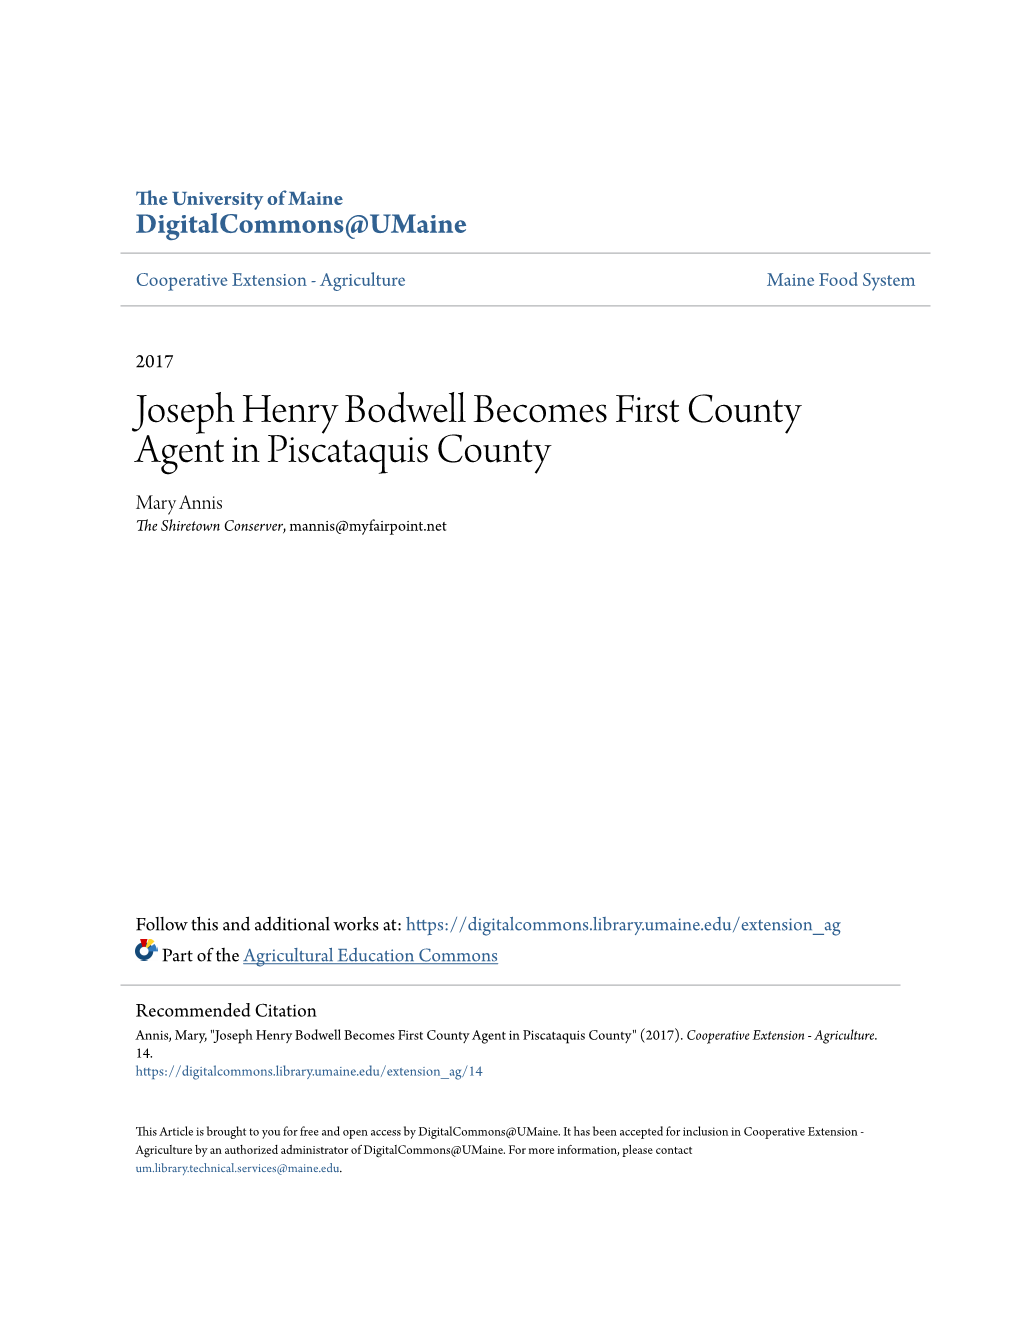 Joseph Henry Bodwell Becomes First County Agent in Piscataquis County Mary Annis the Shiretown Conserver, Mannis@Myfairpoint.Net